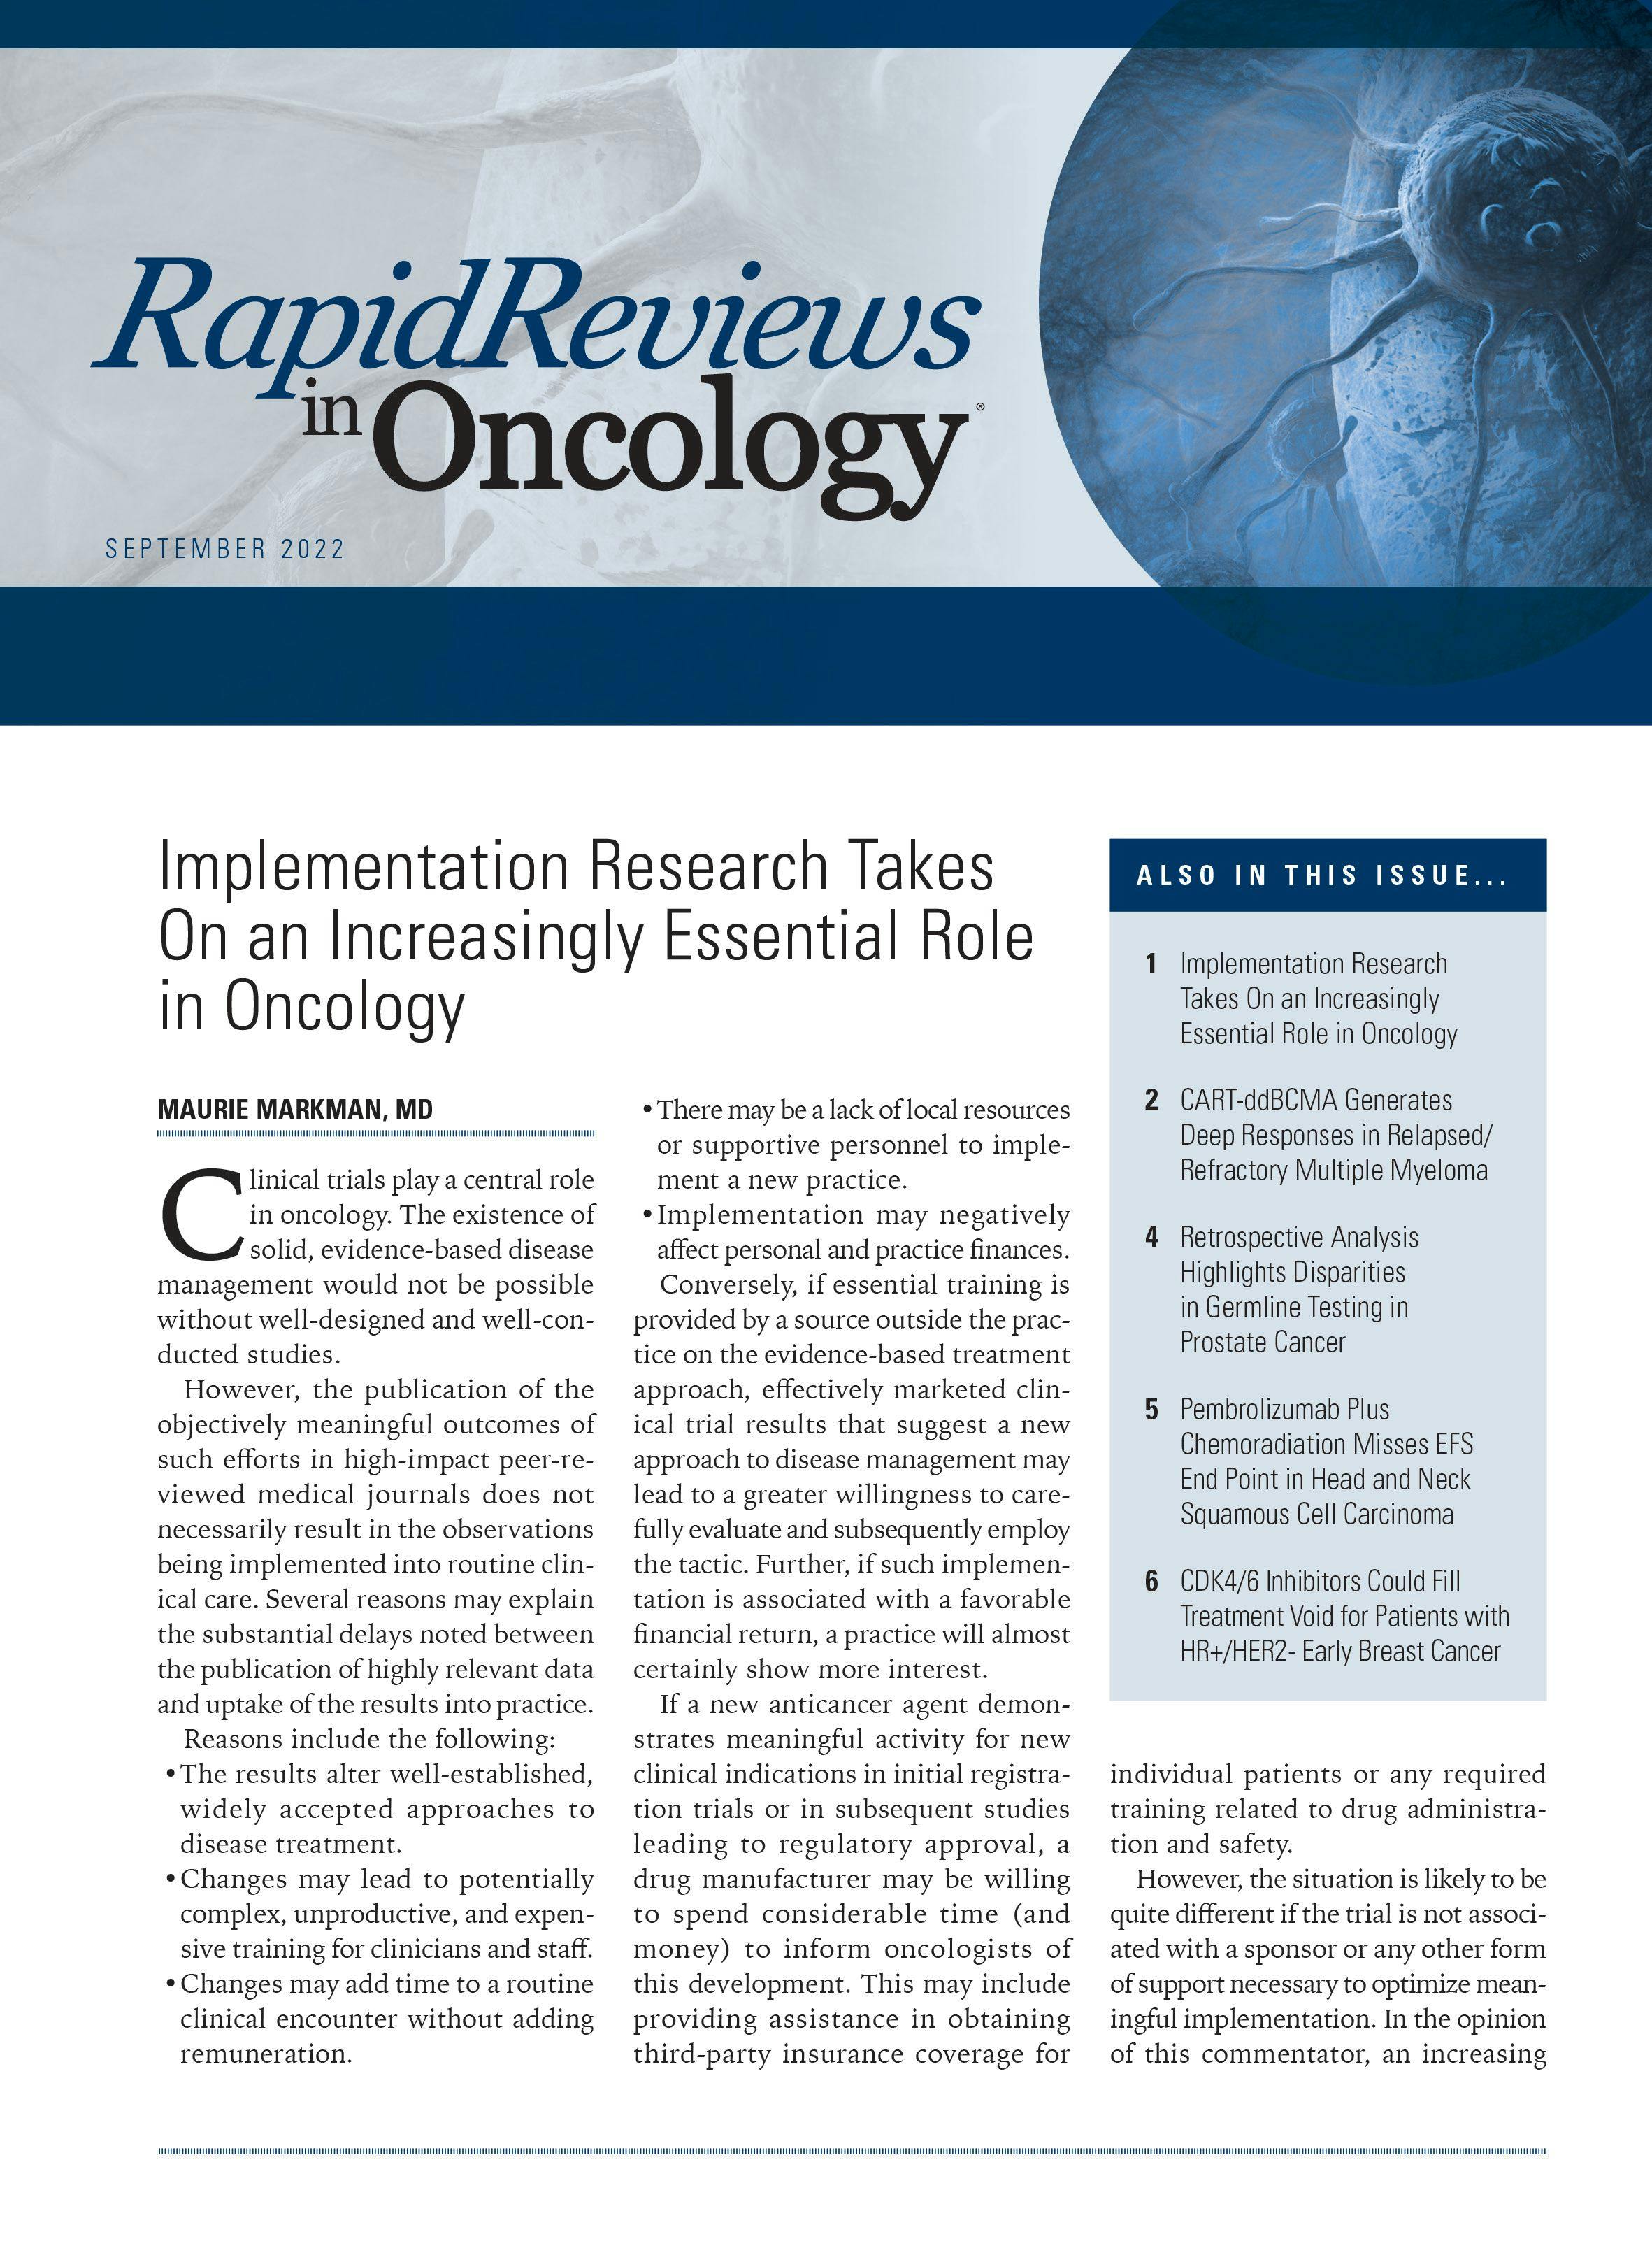 Rapid Reviews in Oncology®: September 2022